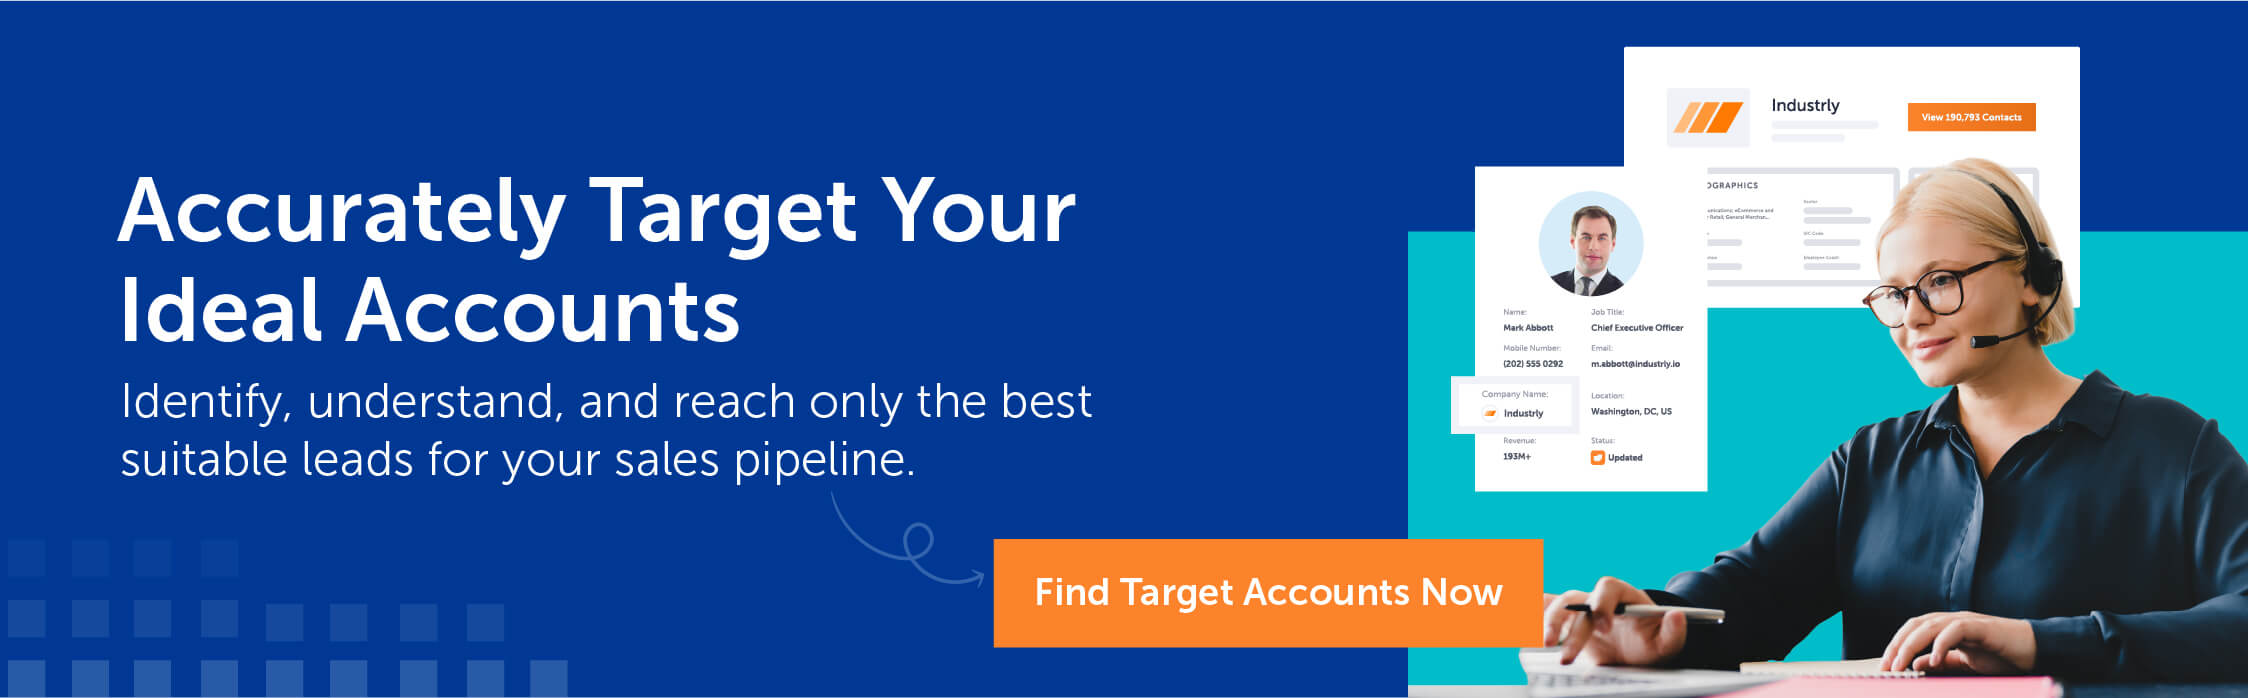 Accurately Target Your Ideal Accounts